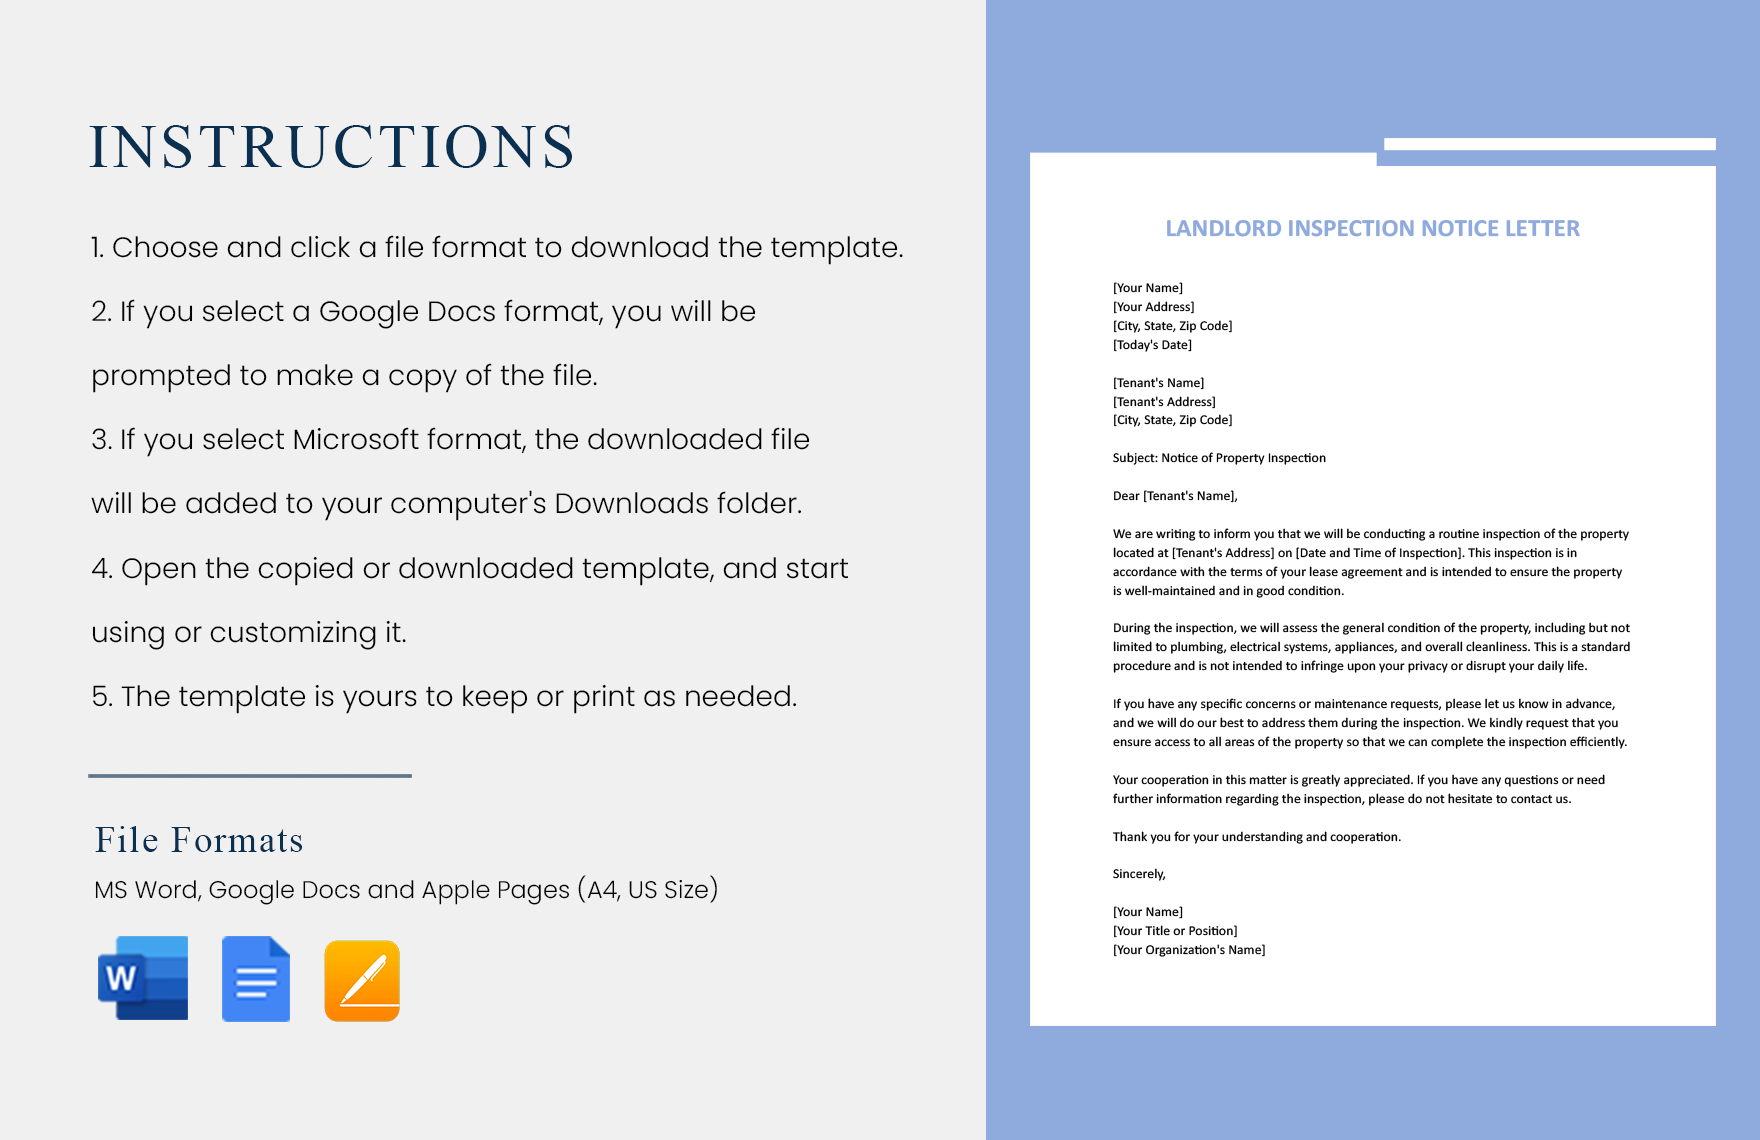 Landlord Inspection Notice Letter